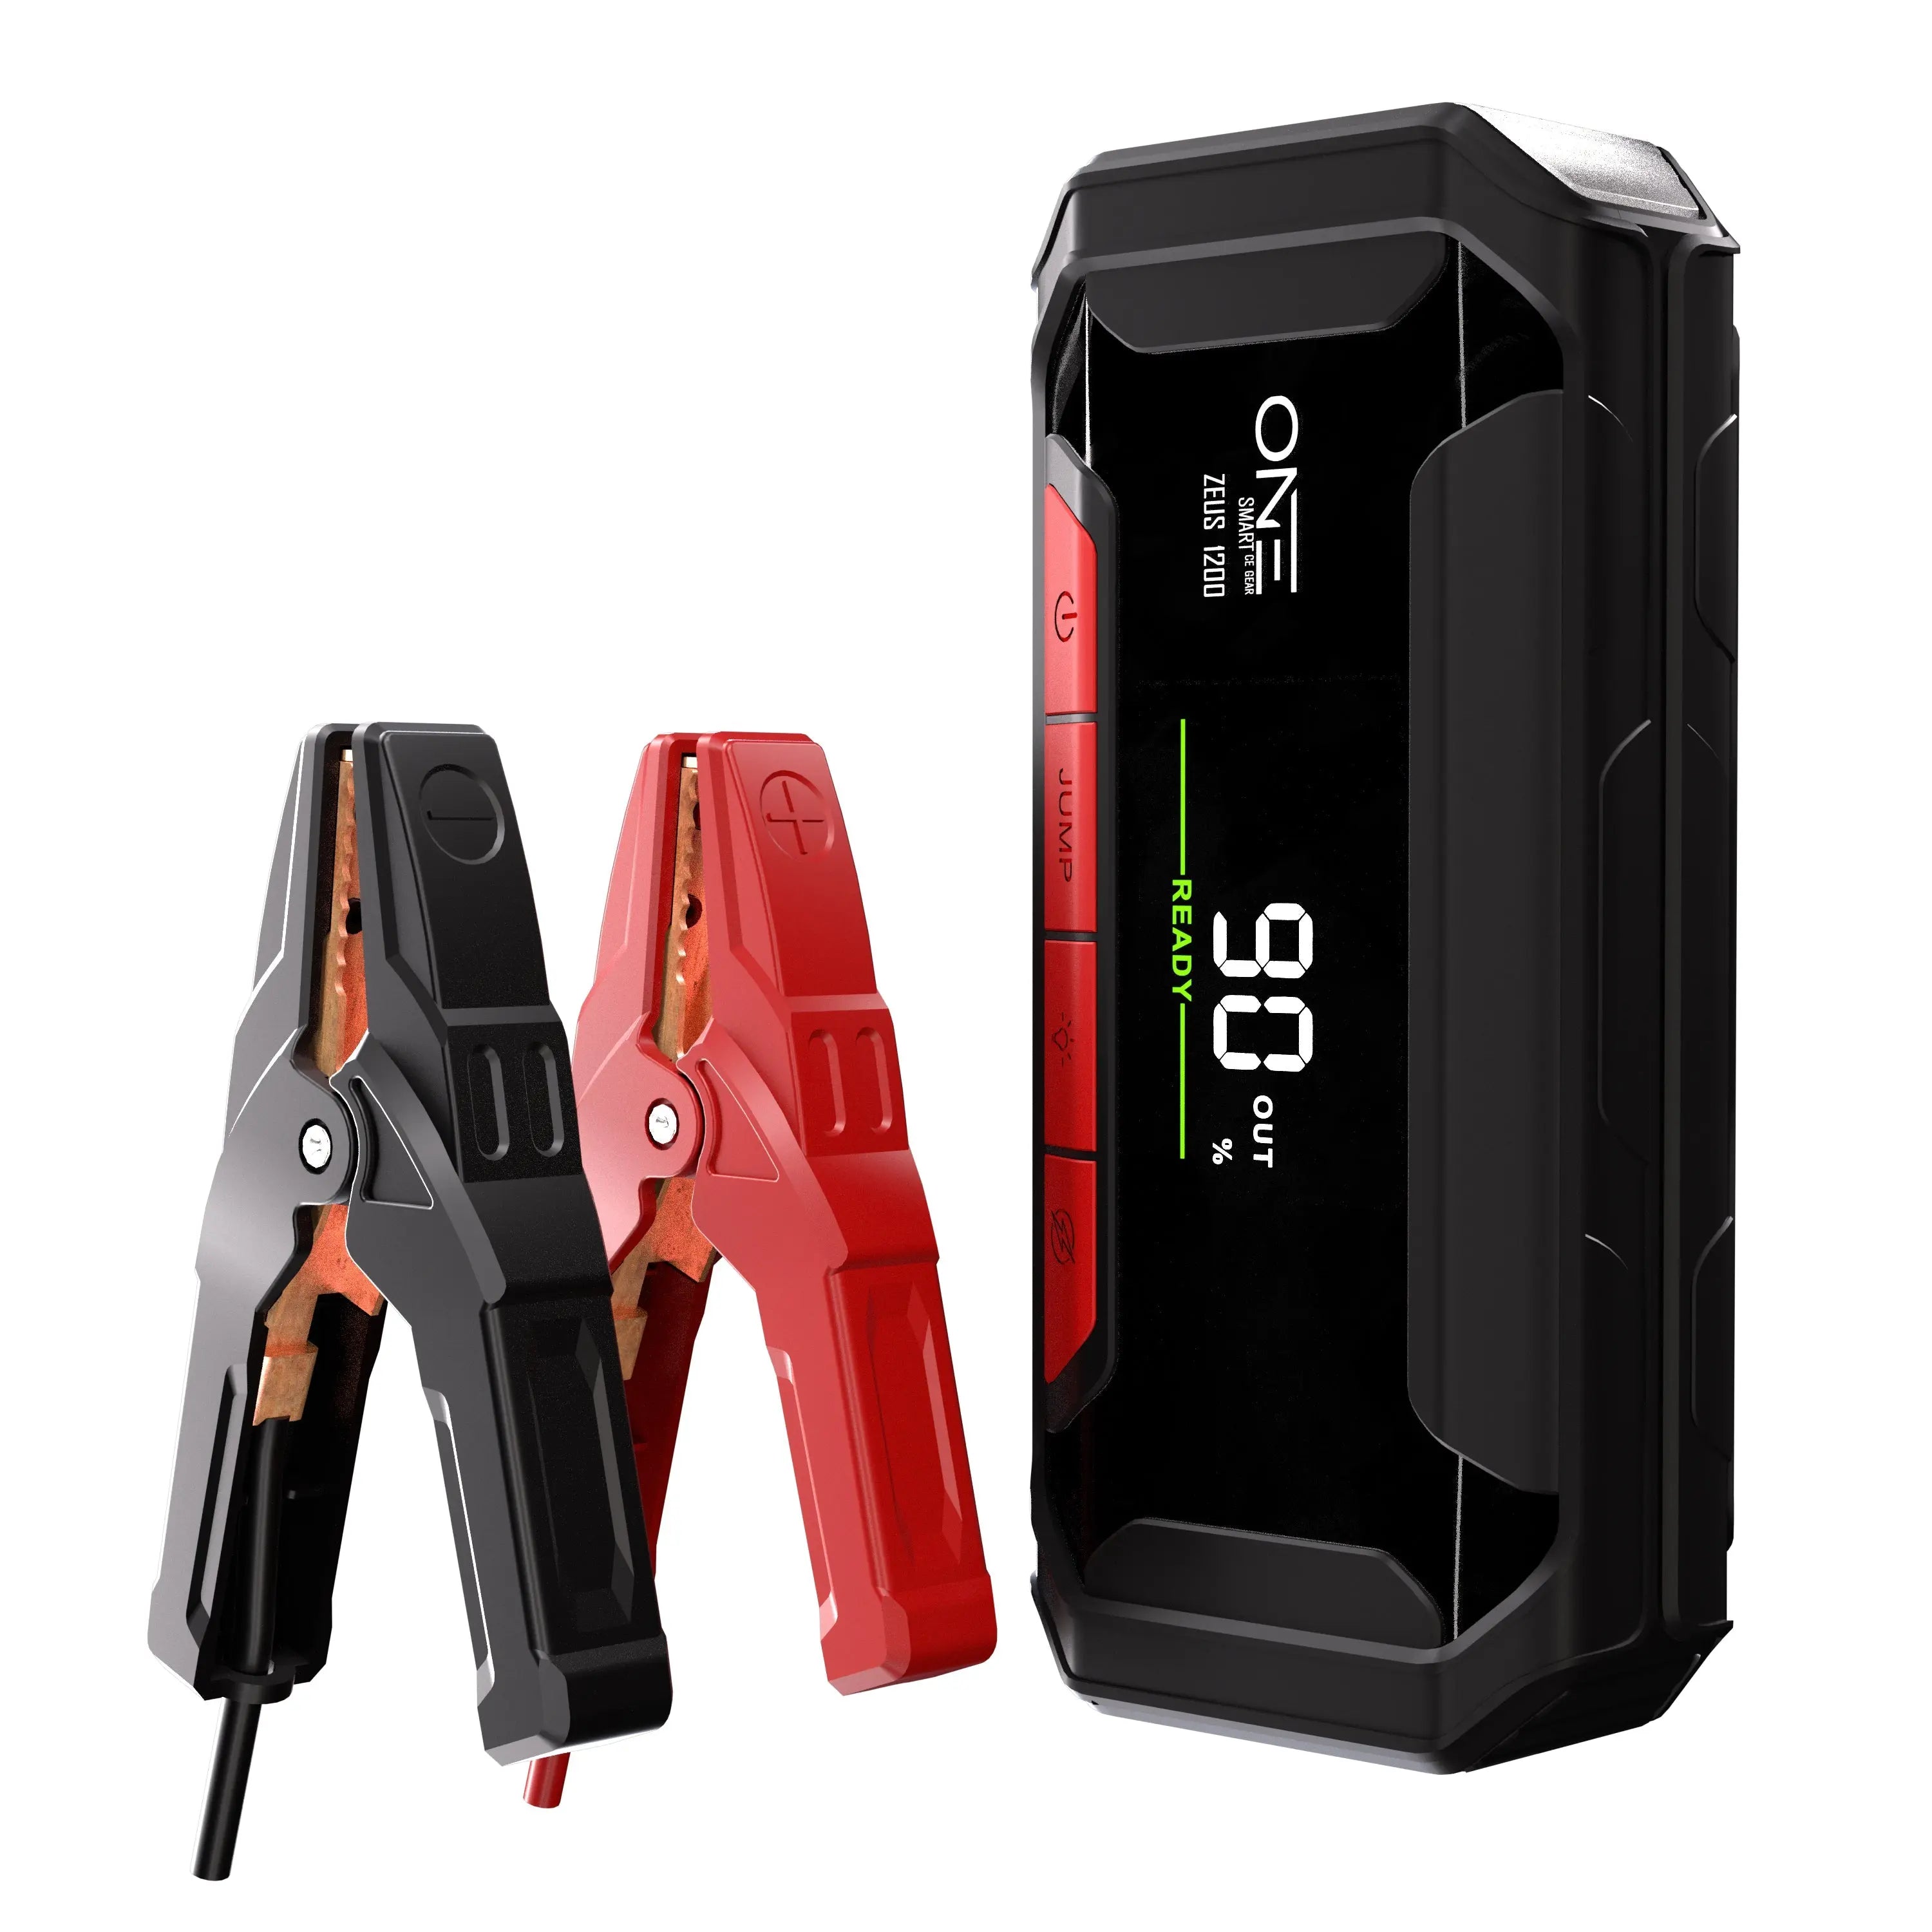 12V Portable Car Jump Starter, Peak 1200A 20000 Mah Auto Battery Booster  Power Bank, with LED Flashlight, Battery Charger, Mini Compass price in UAE,  UAE